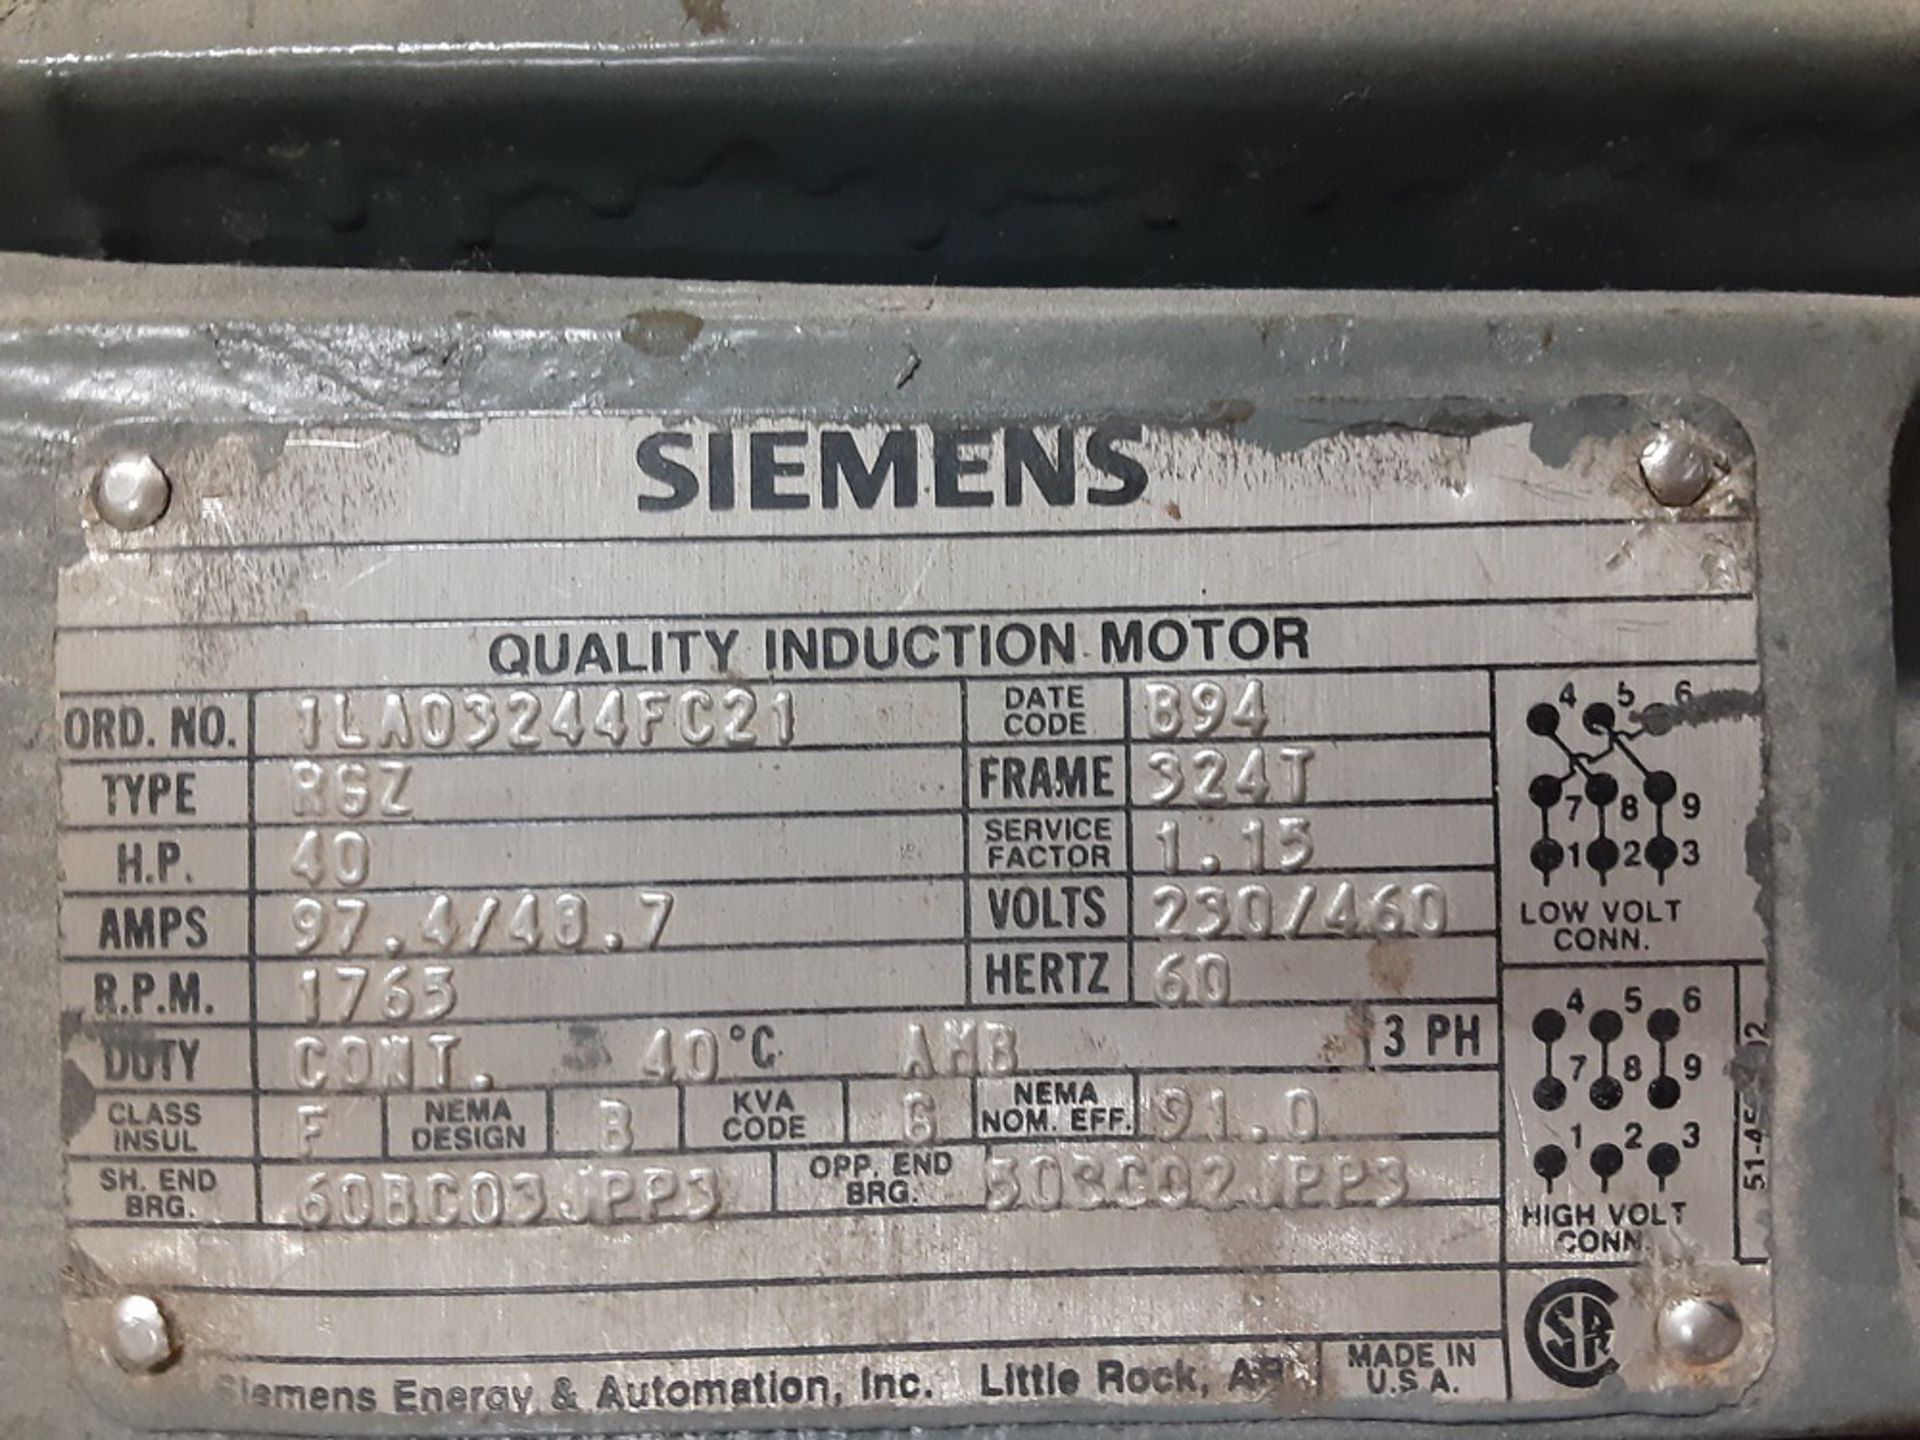 Siemens Electric Motor, 40 HP - Subject to Bulk Bid Lot 845B -The Greater of t | Rig Fee: No Charge - Image 2 of 2